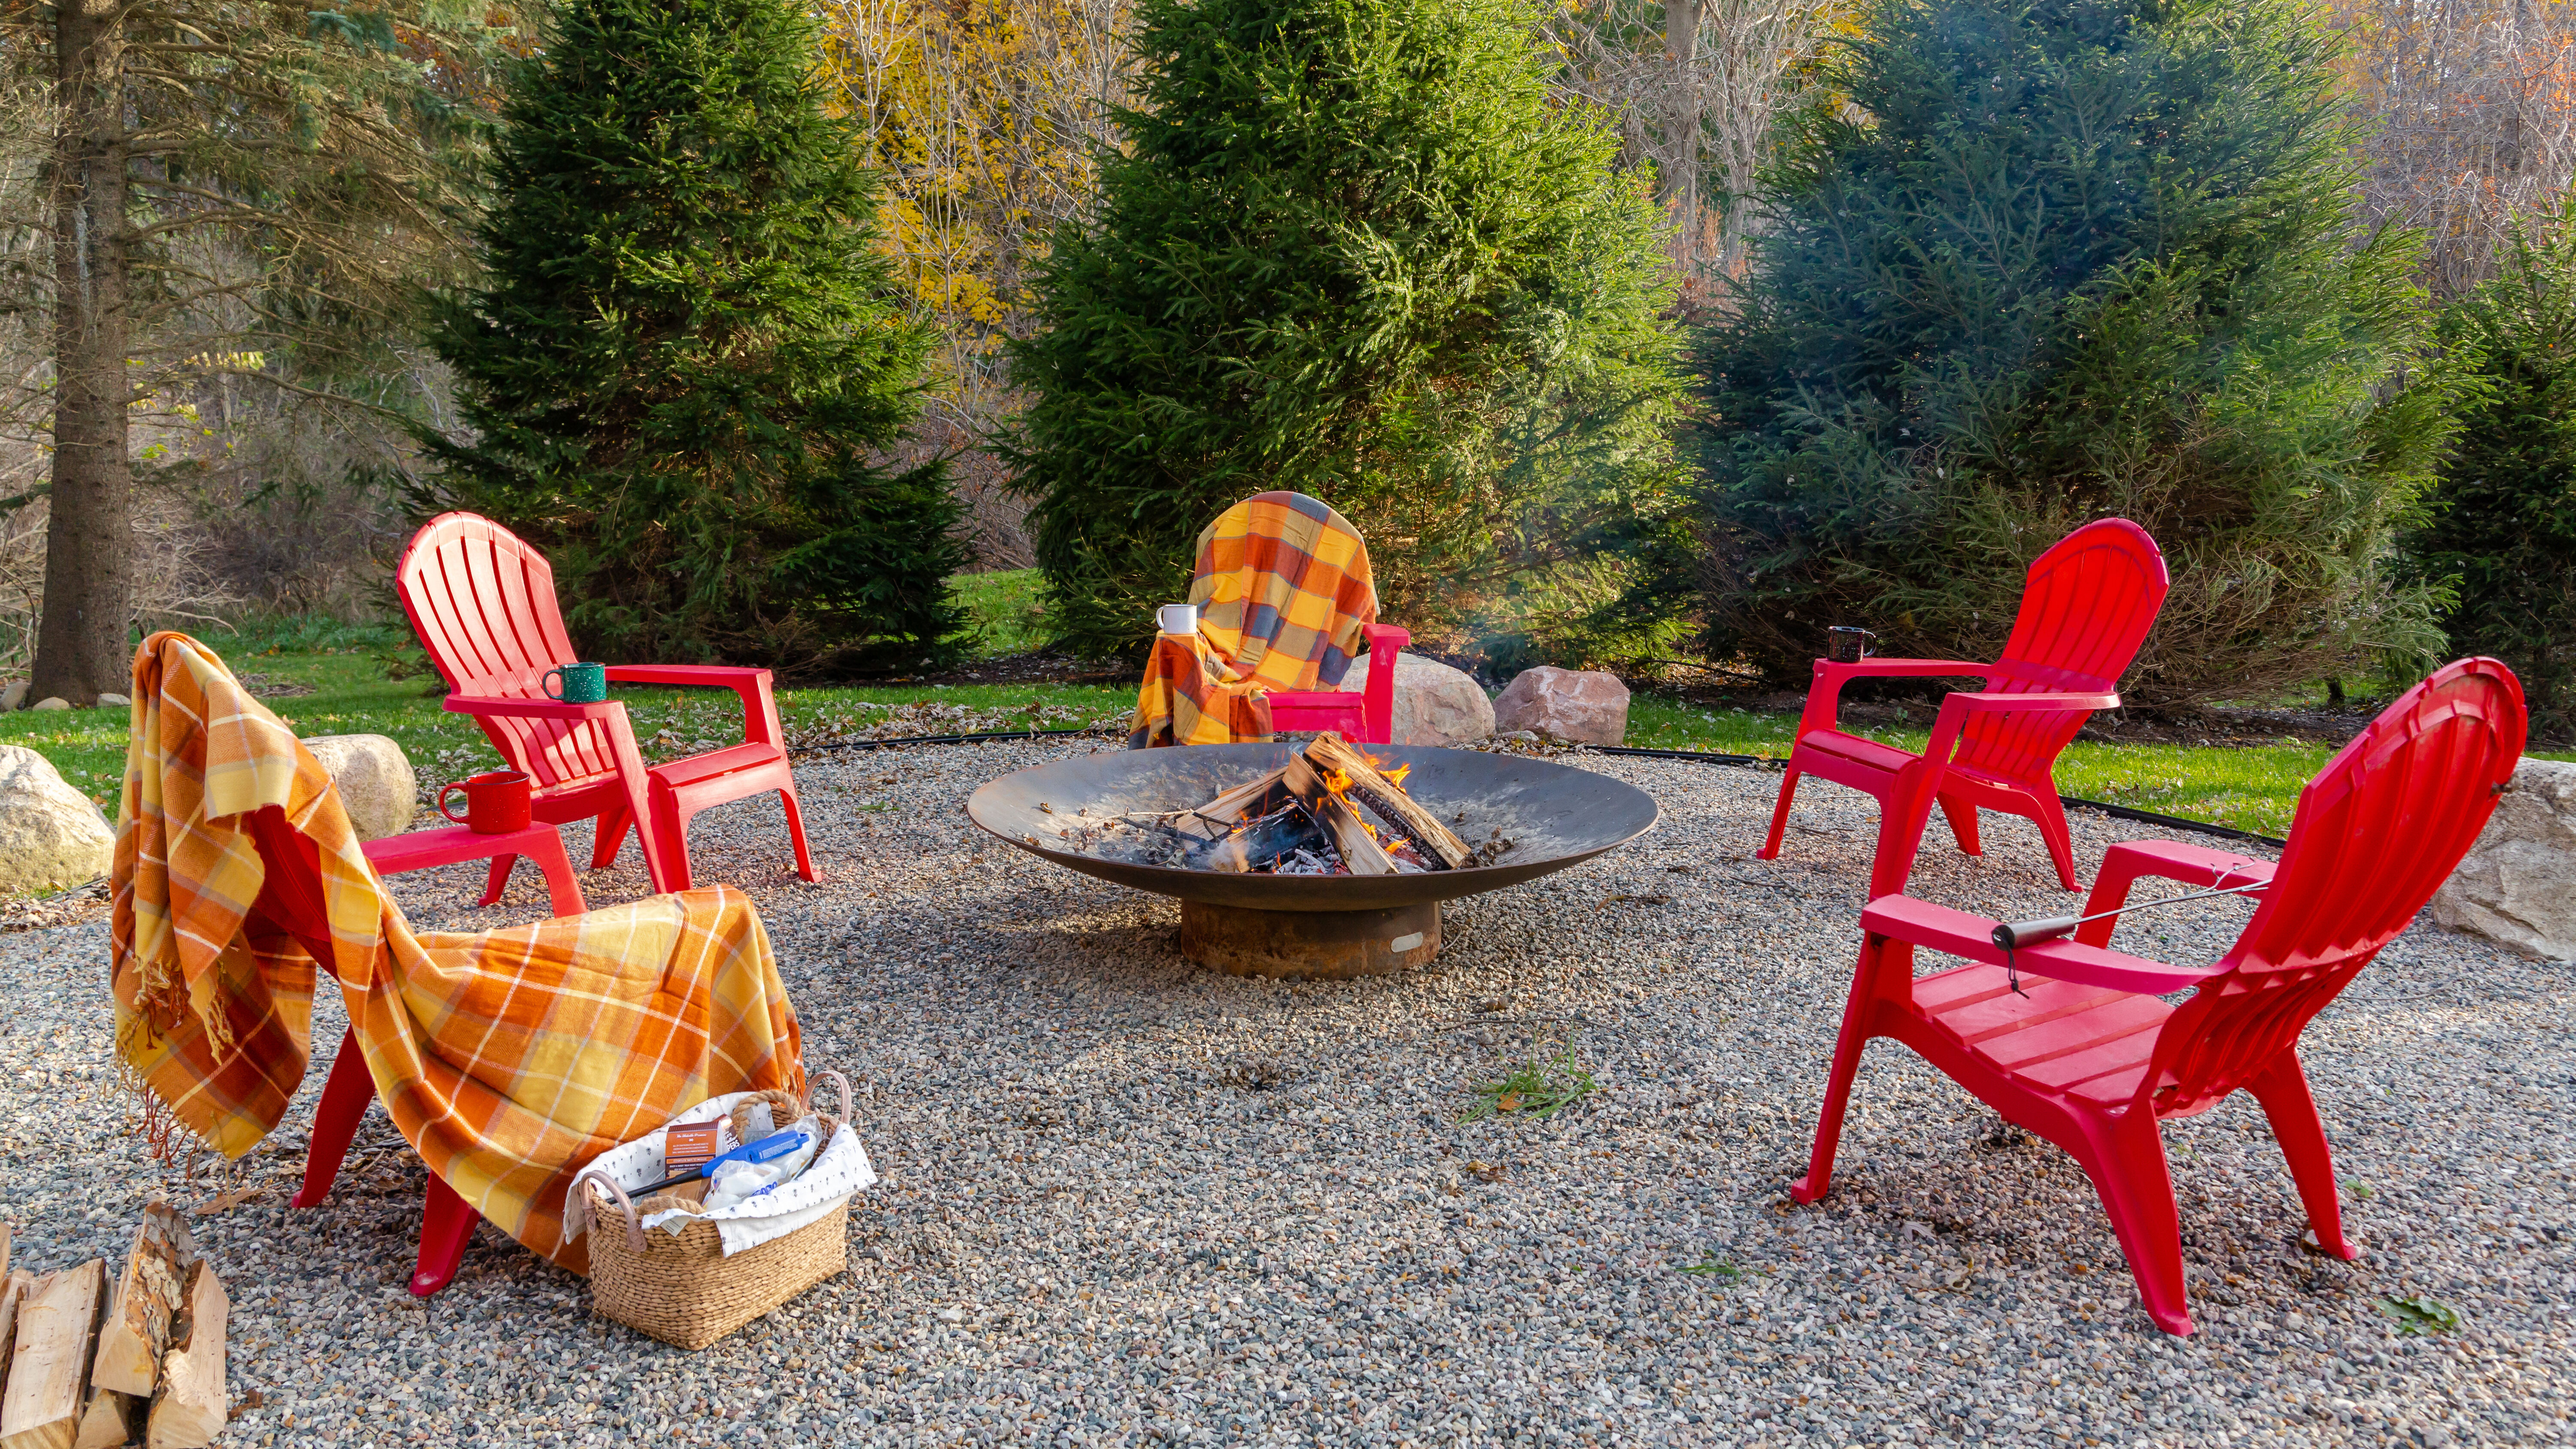 A rustic outdoor bonfire space in the woods with five bright red plastic lounge chairs, orange and yellow plaid blankets, mugs of hot cocoa, and a large steel wood burning fire pit in the center.